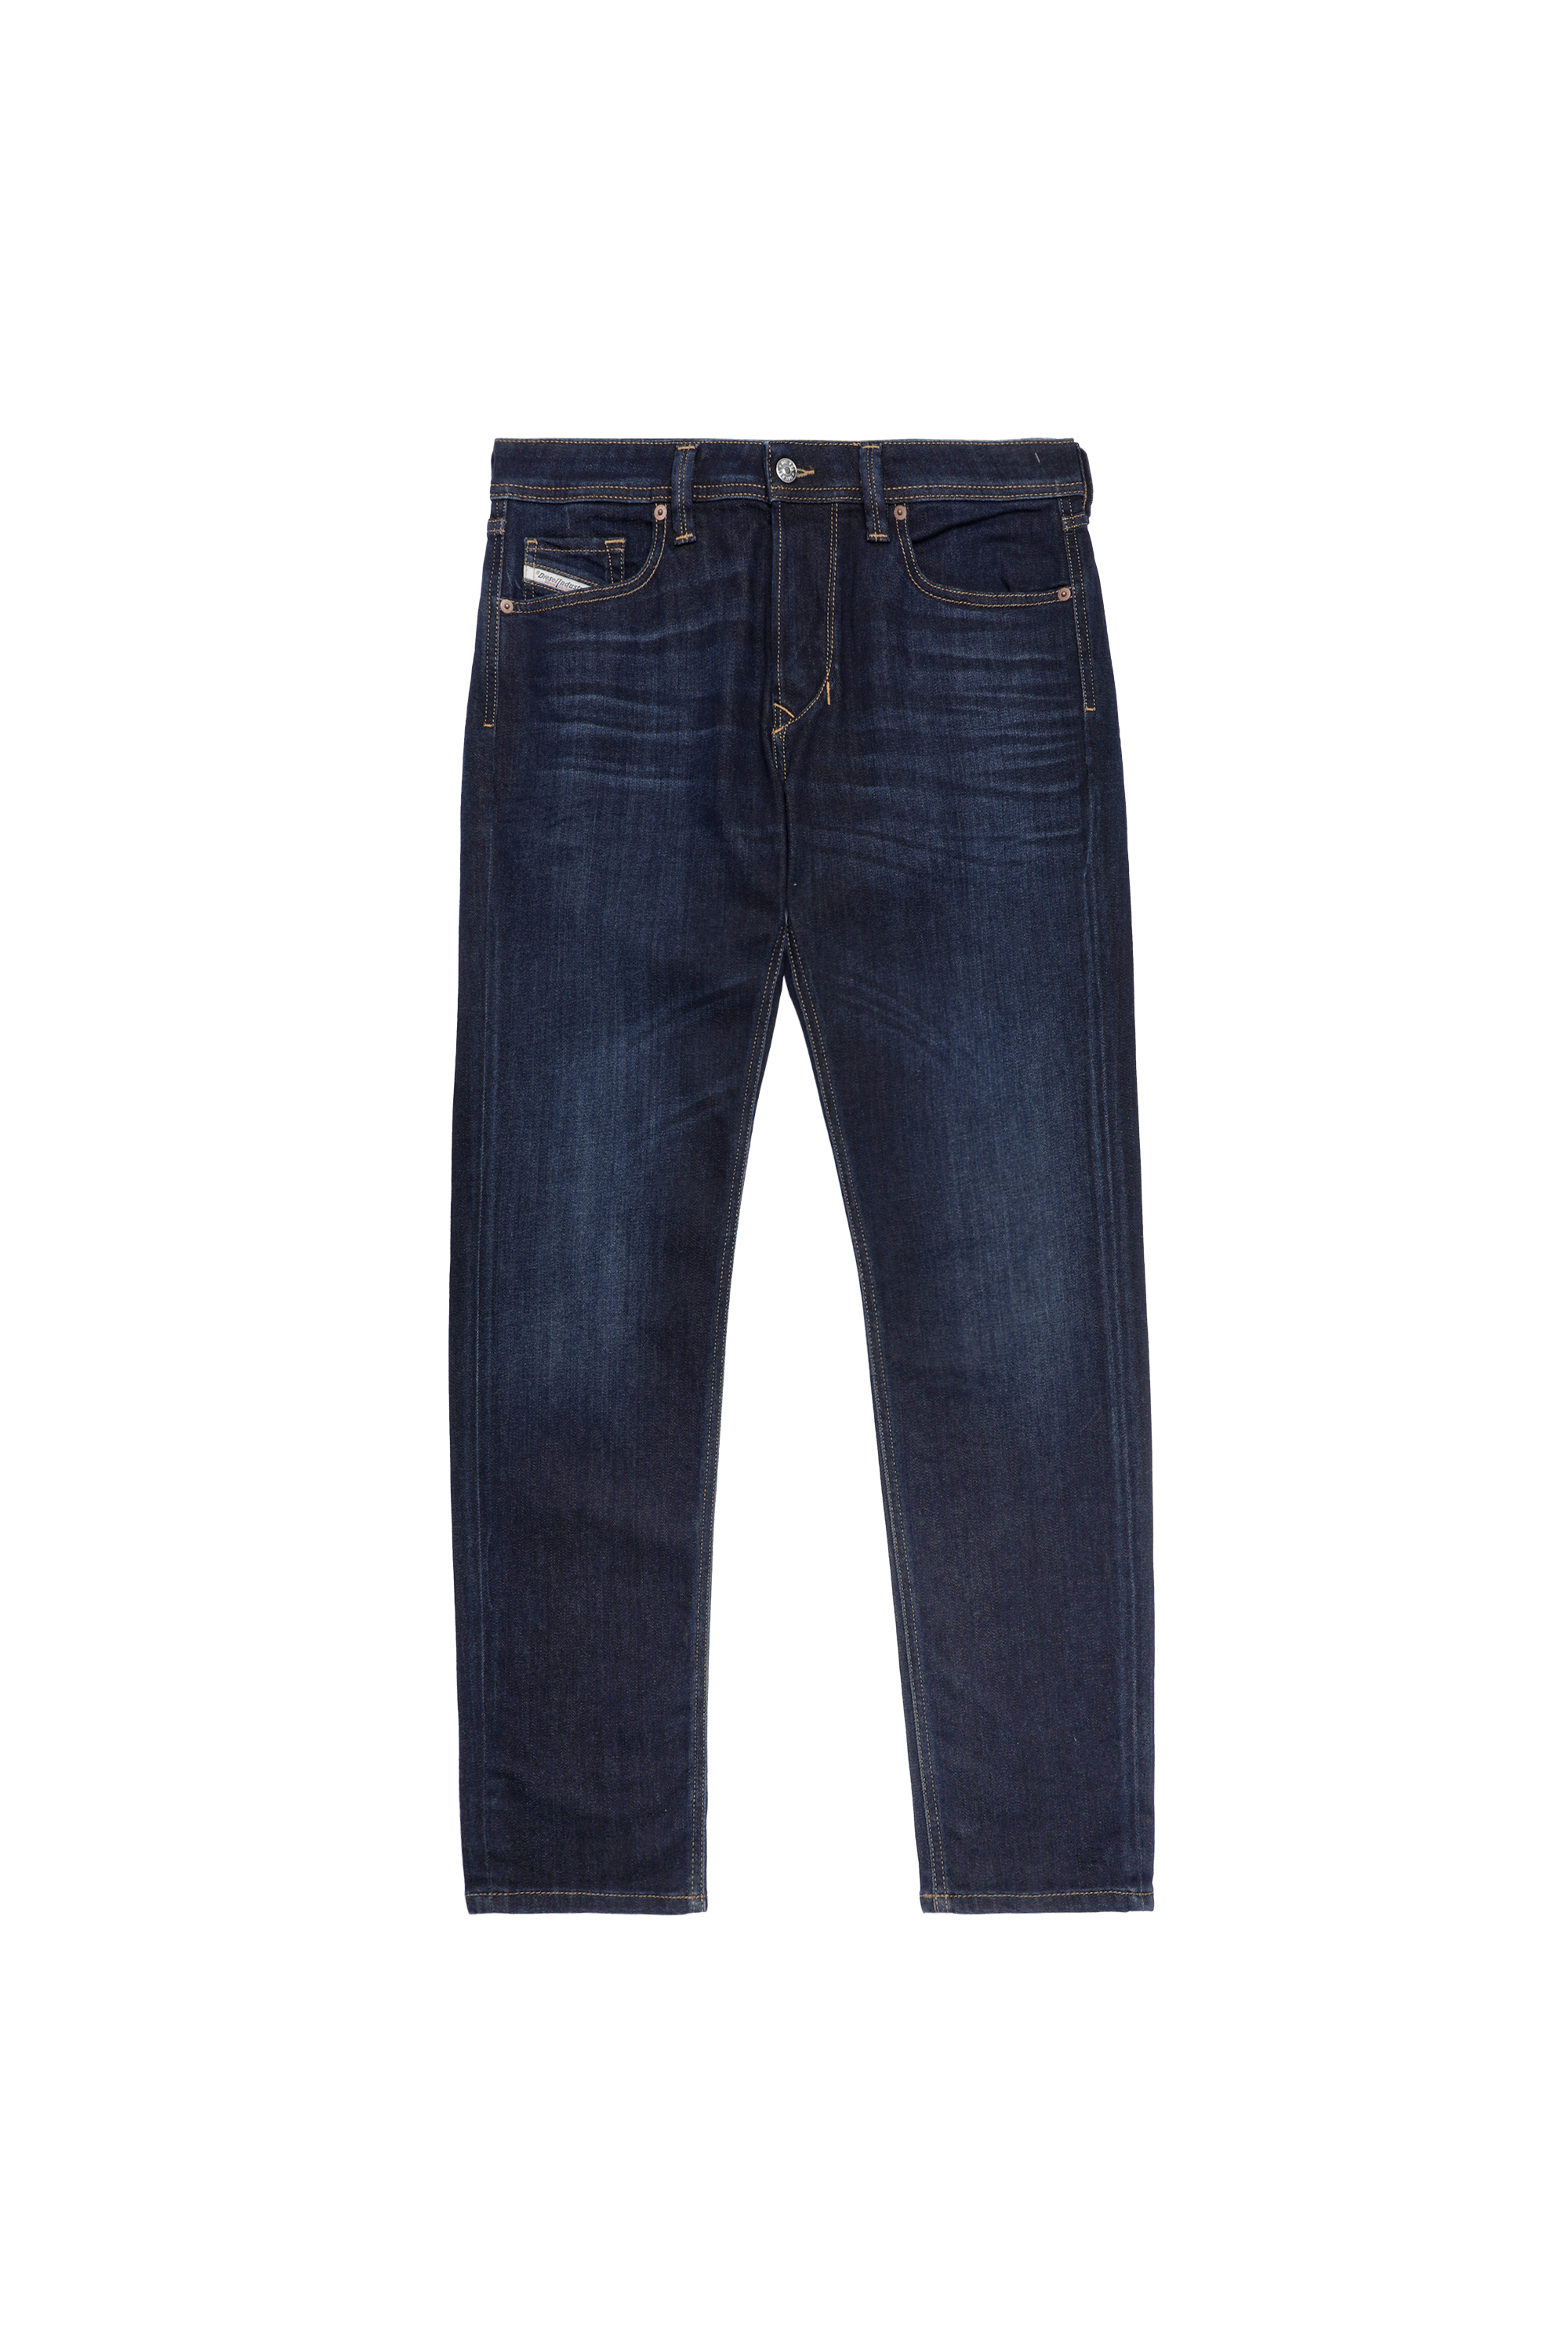 Diesel - Tapered Jeans 1986 Larkee-Beex 009ZS, Hombre Tapered Jeans - 1986 Larkee-Beex in Azul marino - Image 7